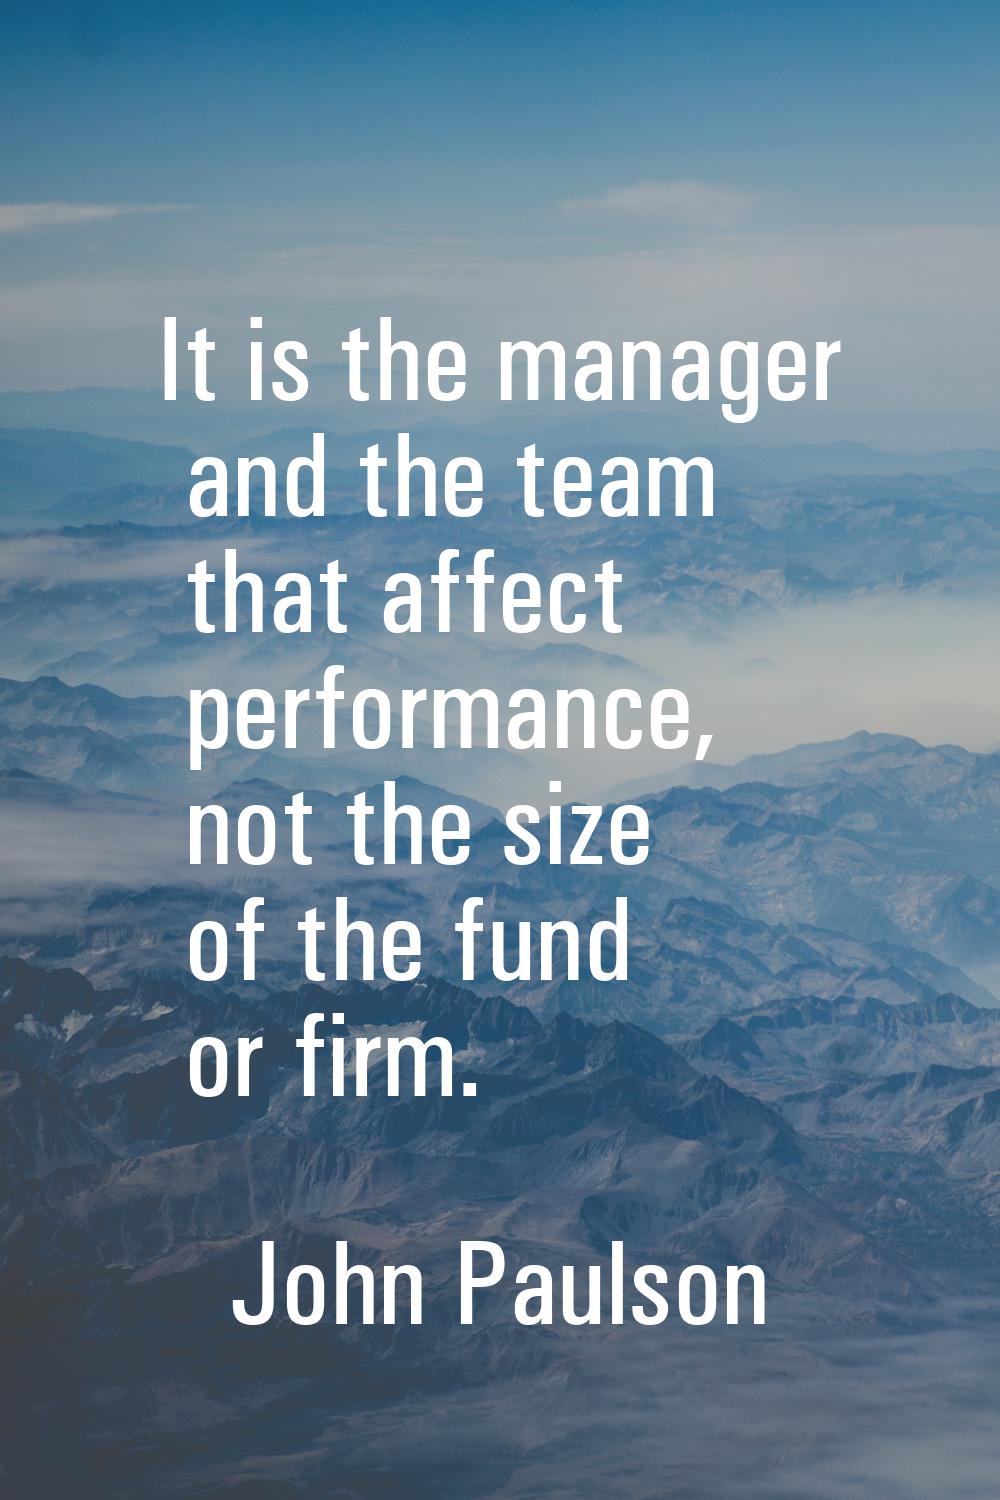 It is the manager and the team that affect performance, not the size of the fund or firm.